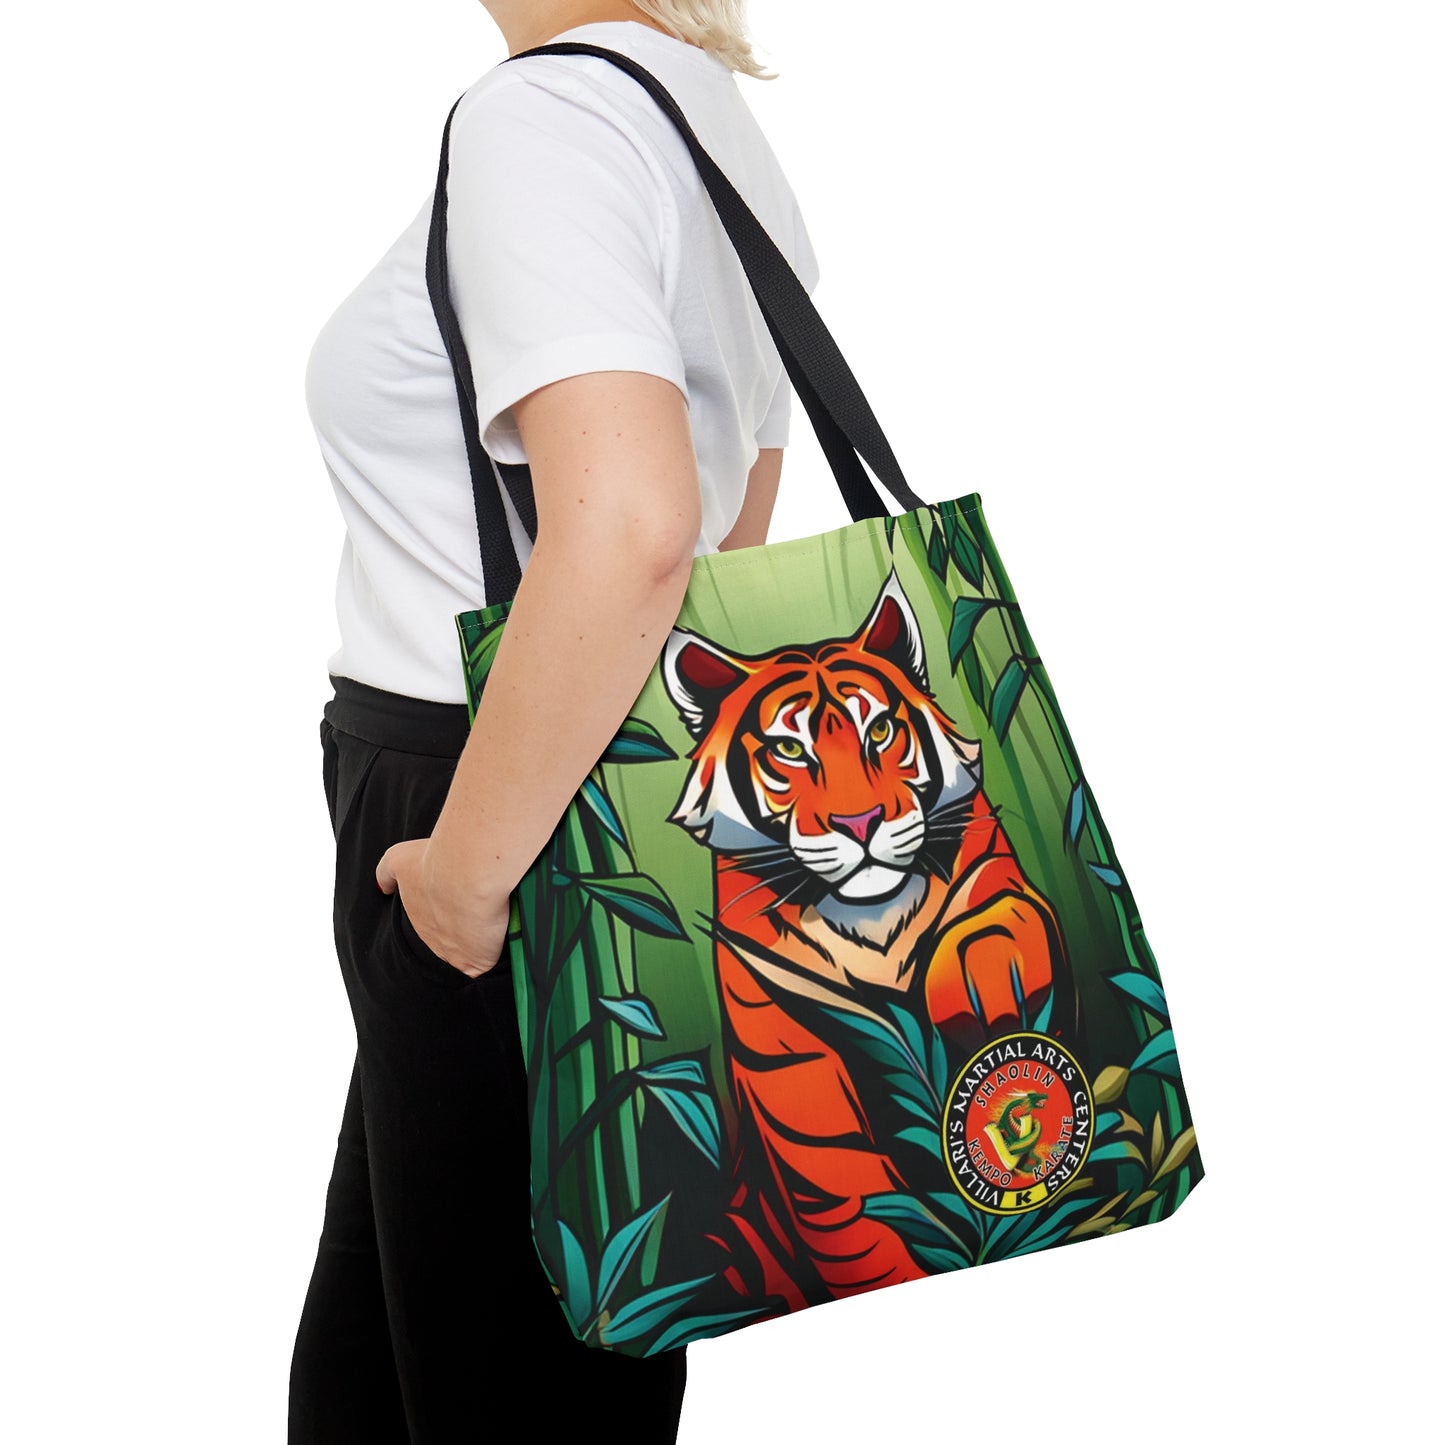 Tiger in Bamboo Forest Tote Bag